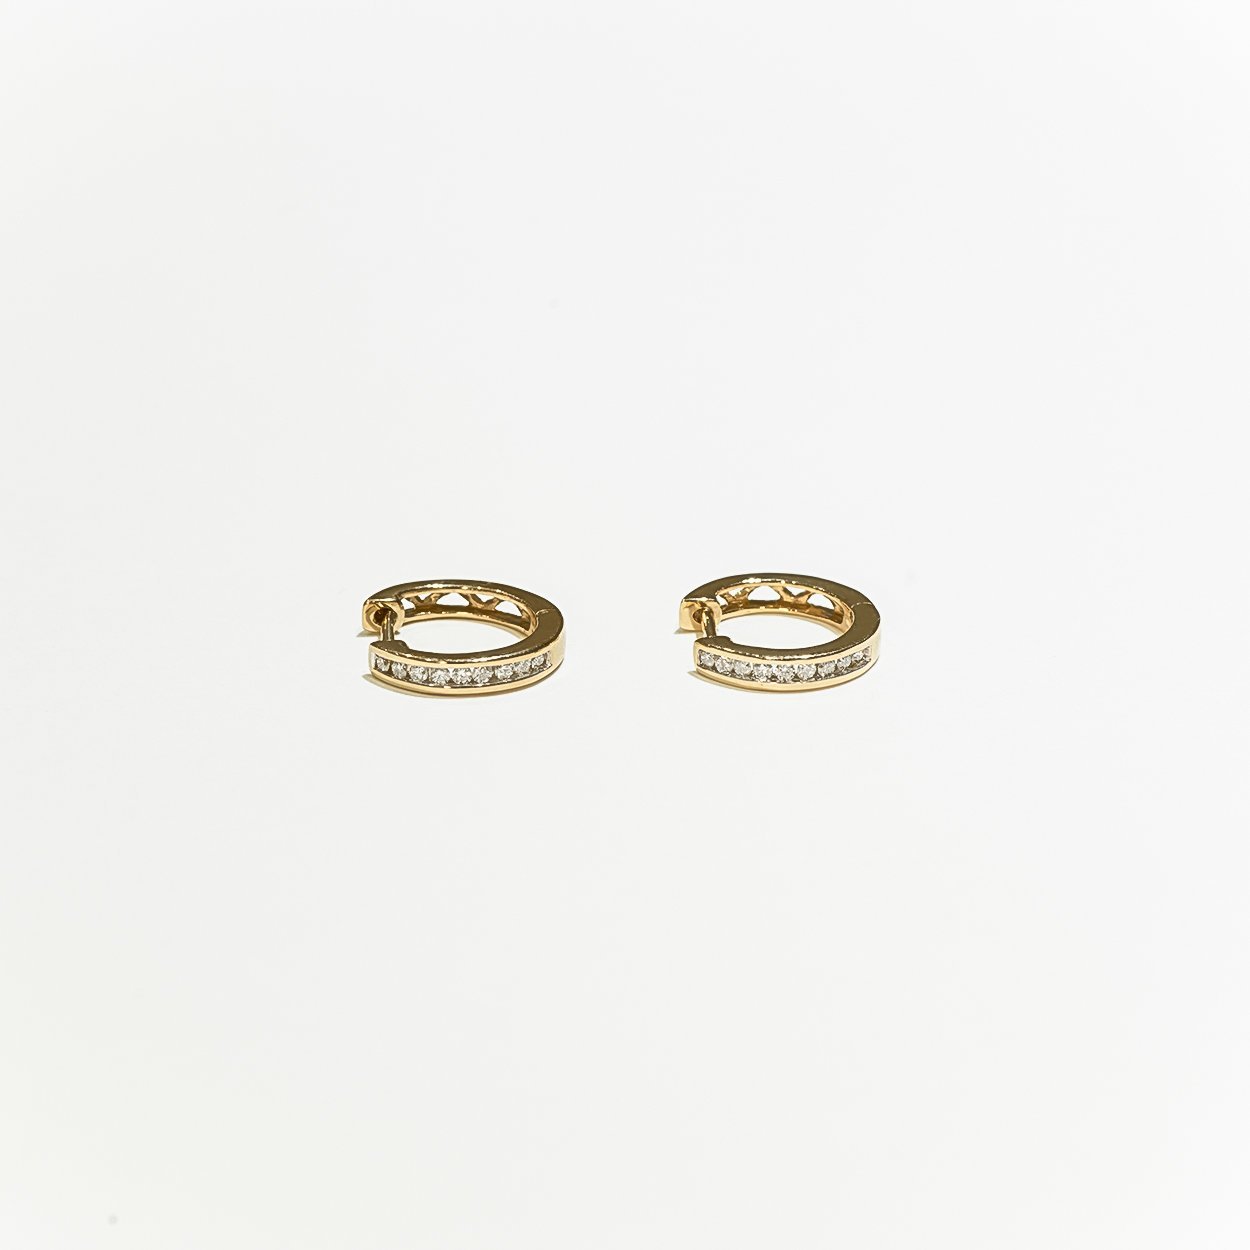 14K Solid Gold 0.16ctw Diamond Hoop Earrings - anygolds